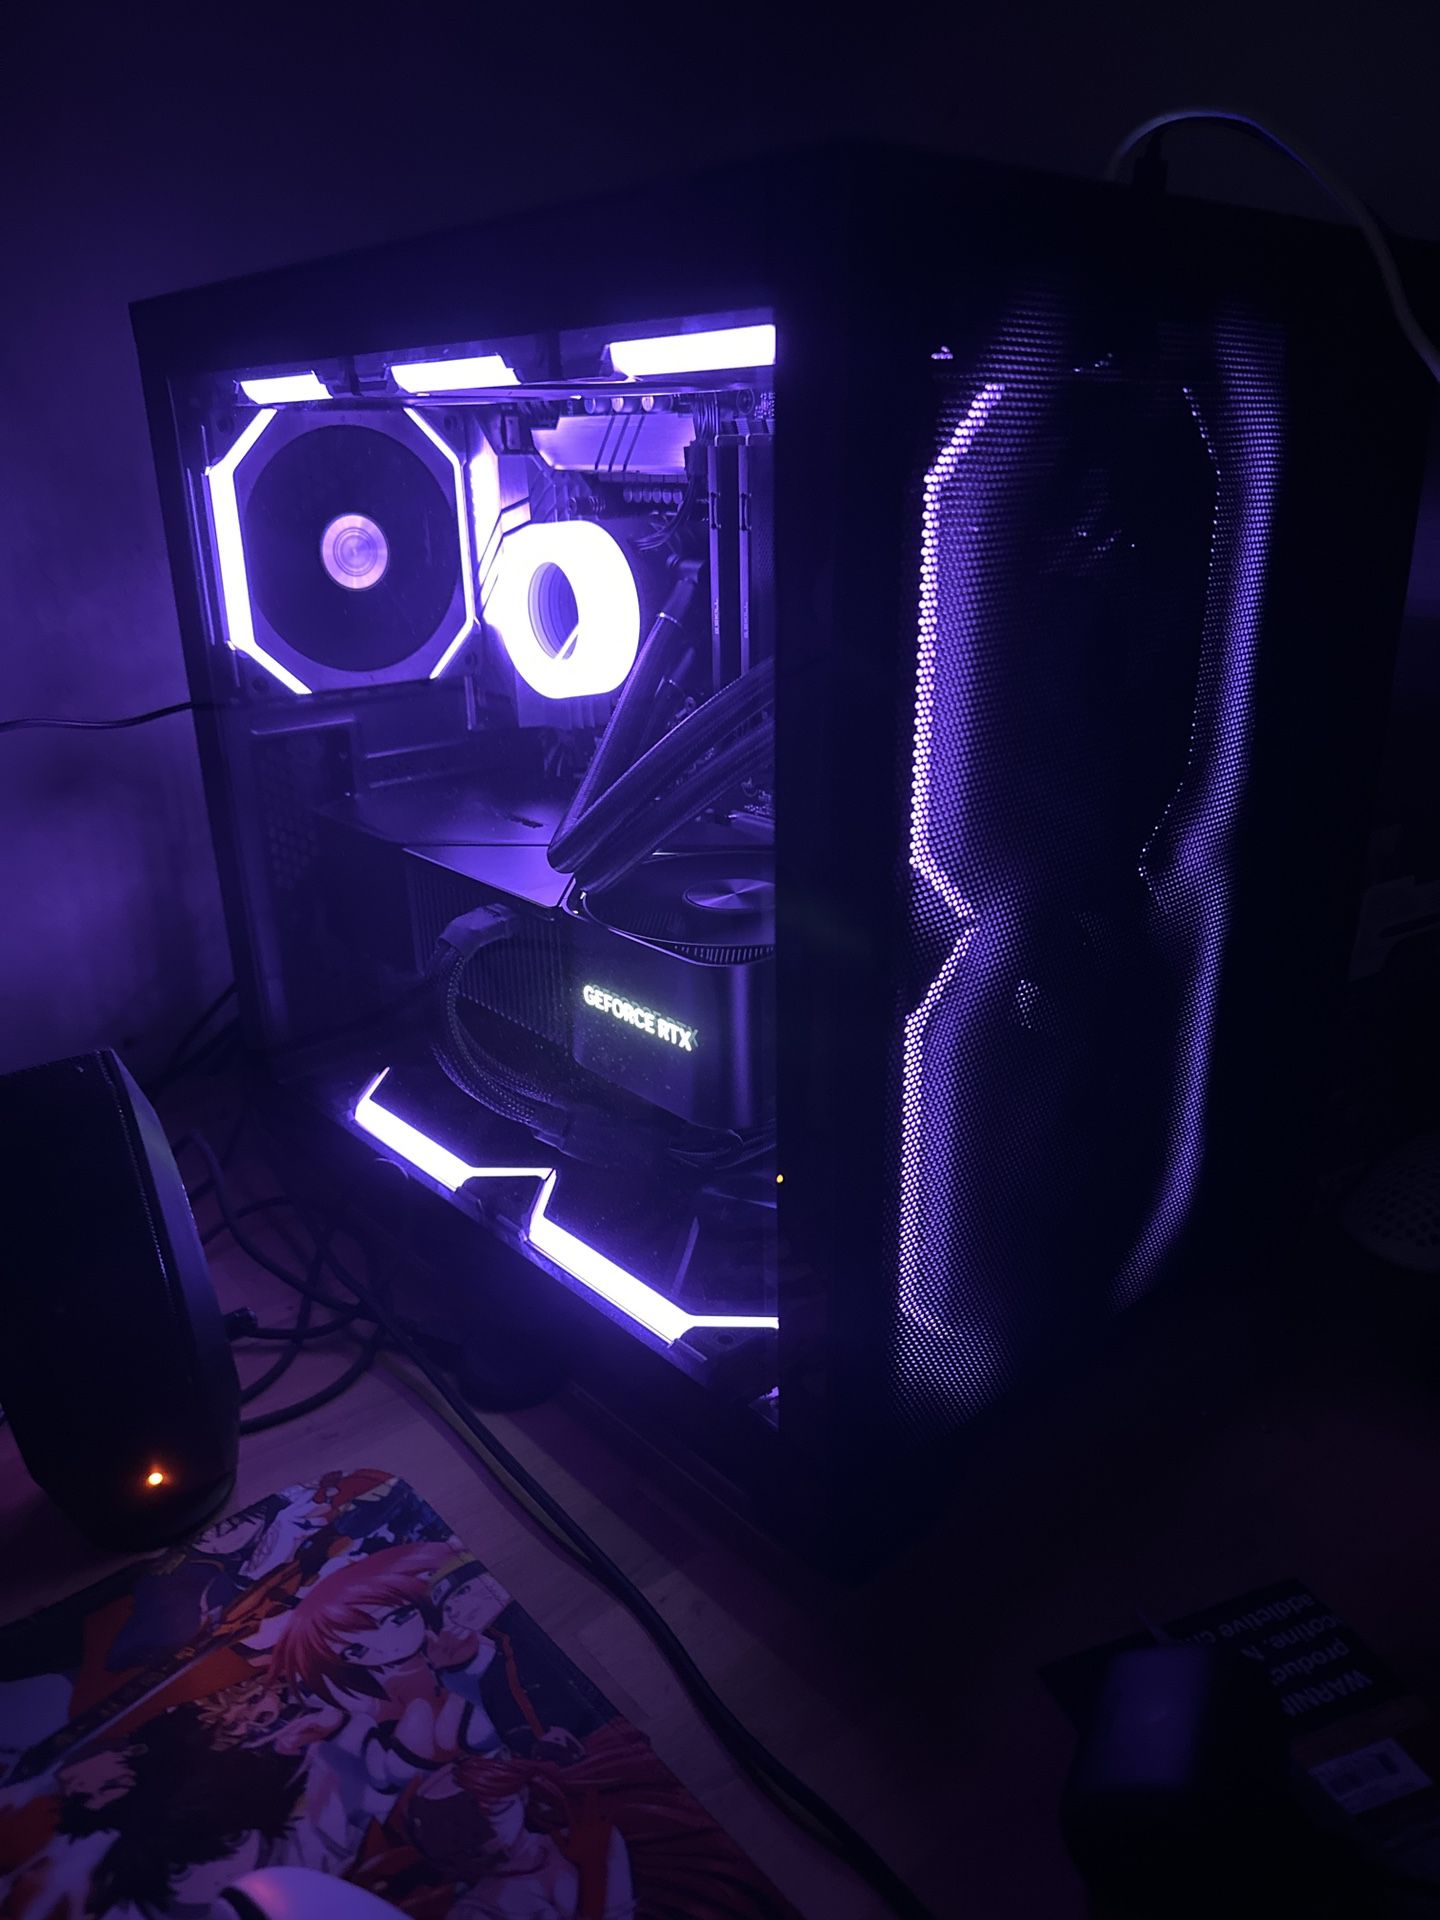 Gaming Custom Pc With High End Parts 